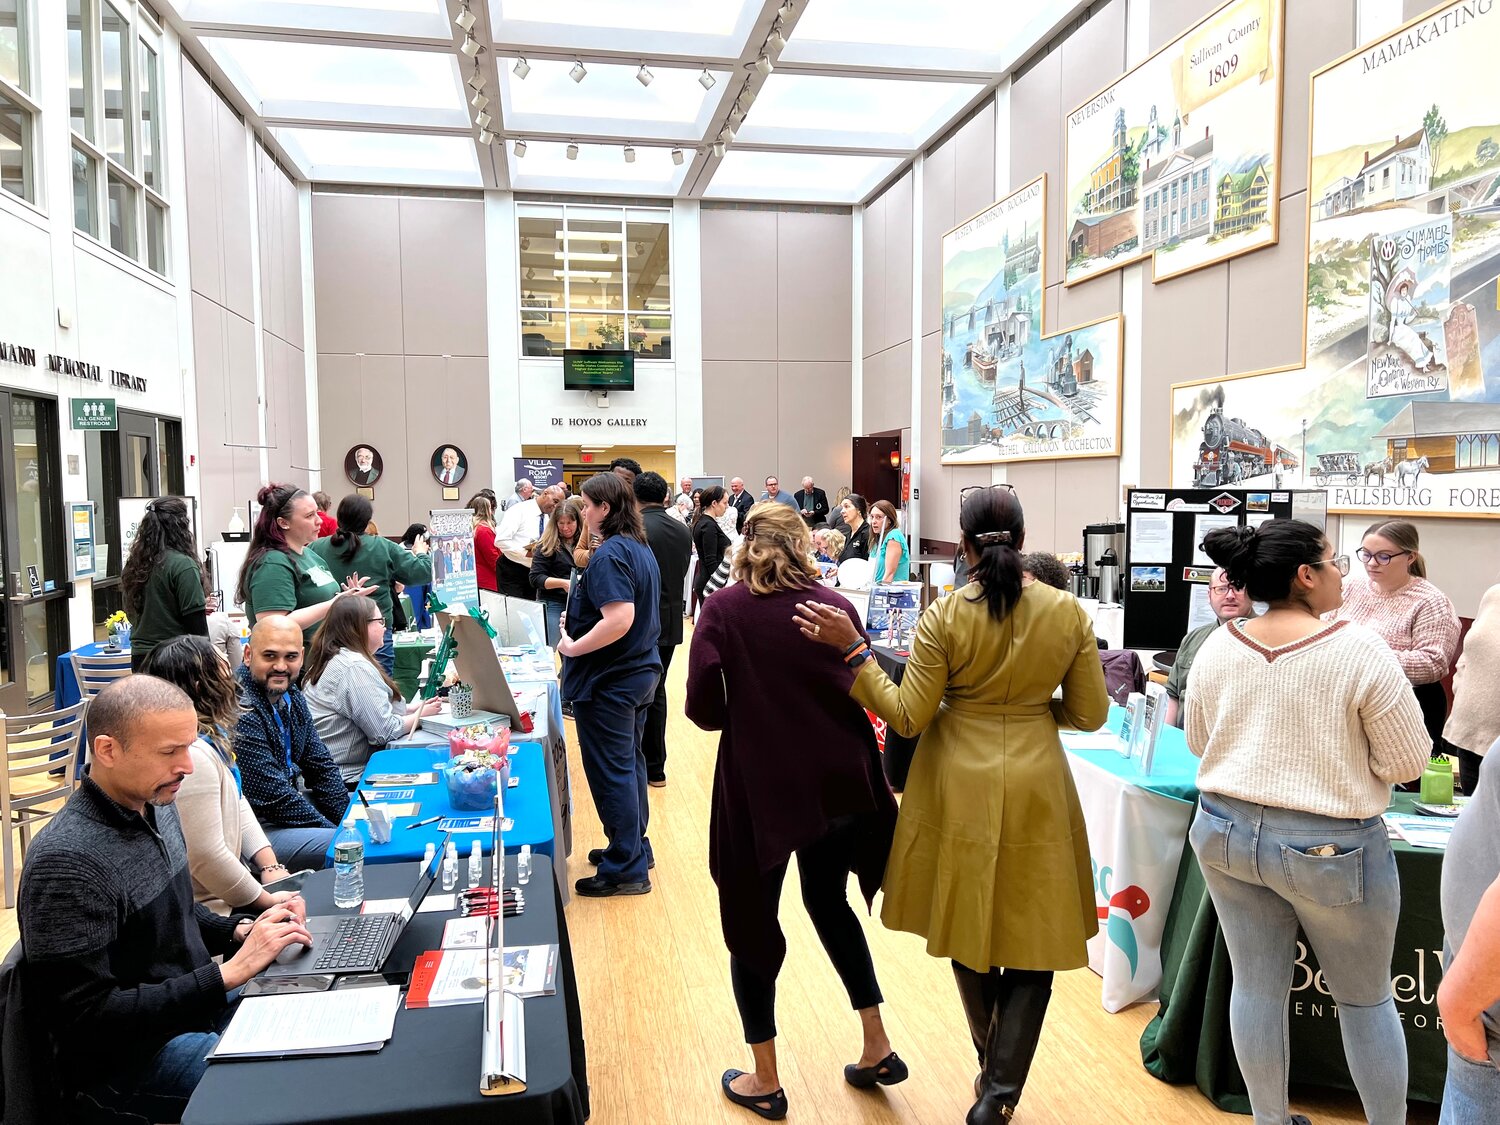 The SUNY Sullivan Career Center’s Career & Job Fair attracted a crowd of regional businesses and job seekers on Wednesday, April 5.